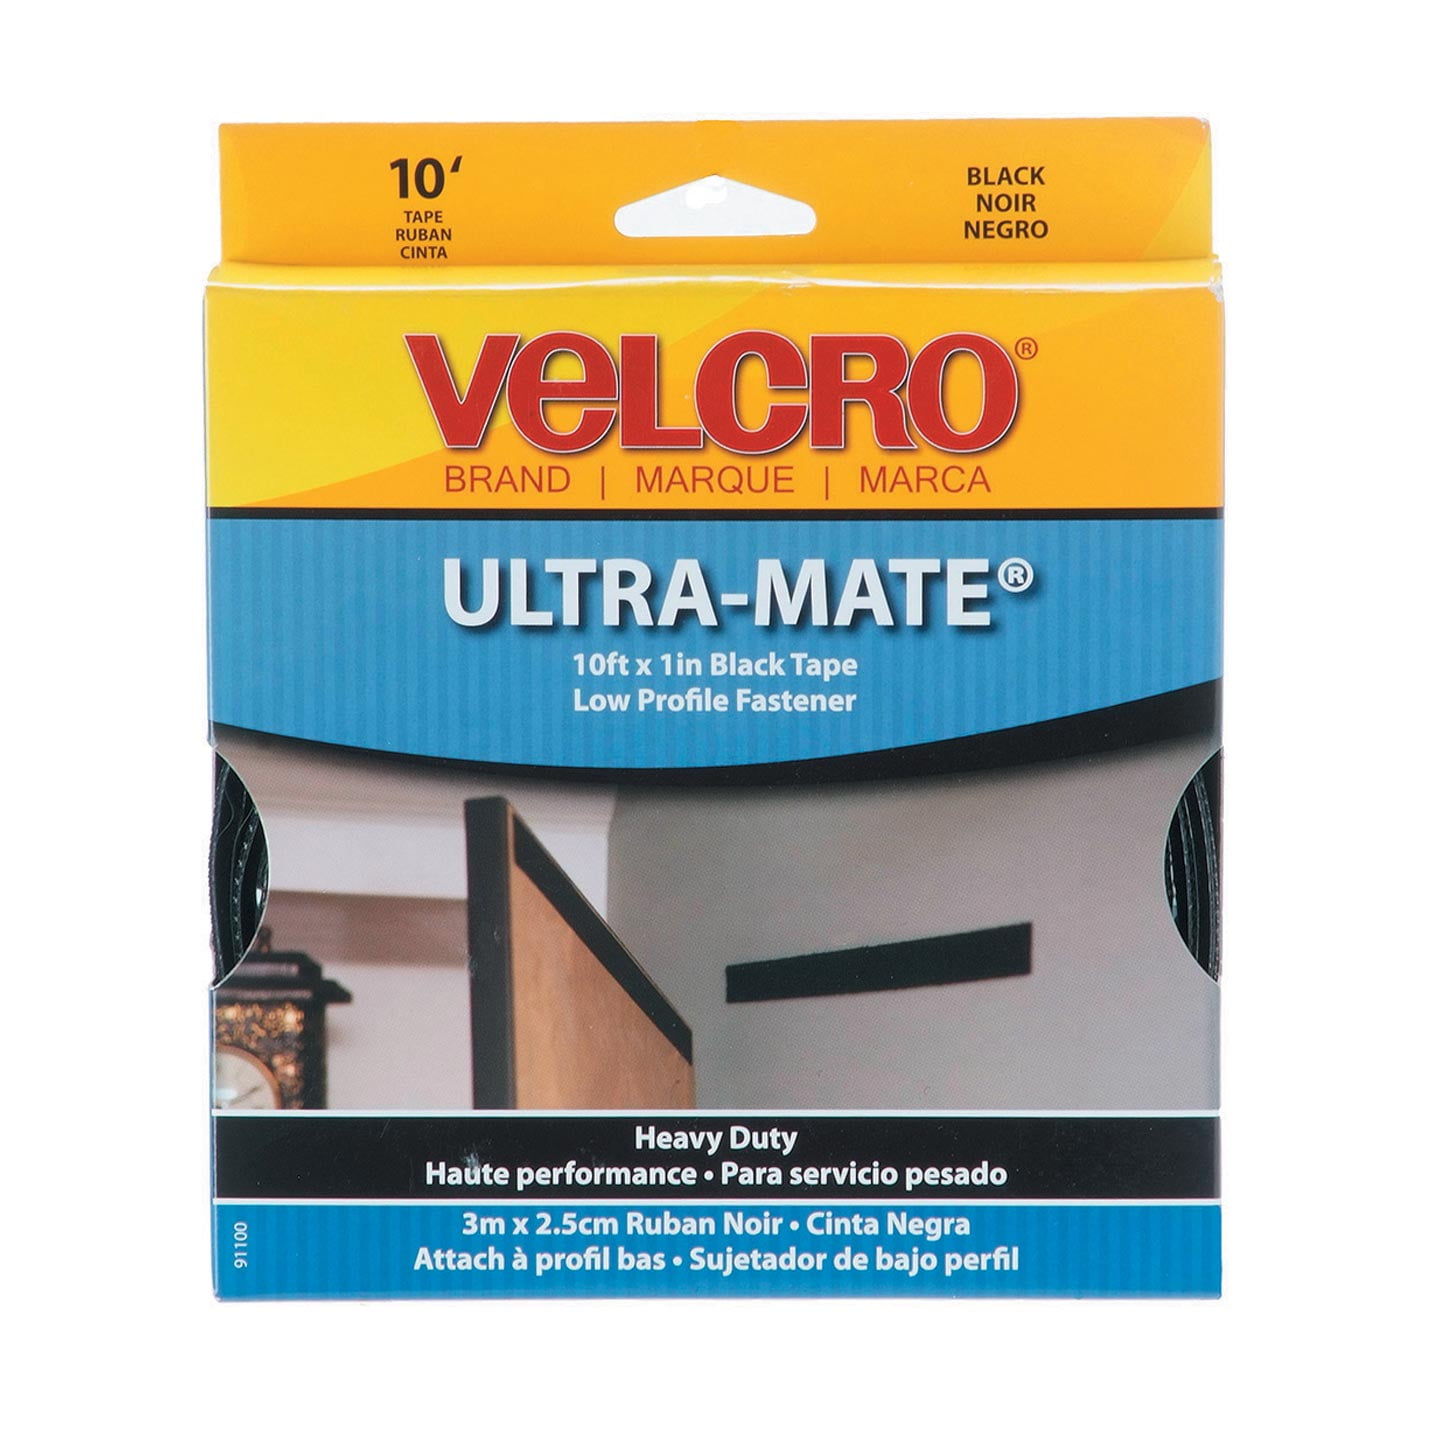 VELCRO Brand Industrial Strength, Indoor & Outdoor Use, Superior Holding  Power on Smooth Surfaces, Black, 15' x 2 Roll (30147) 